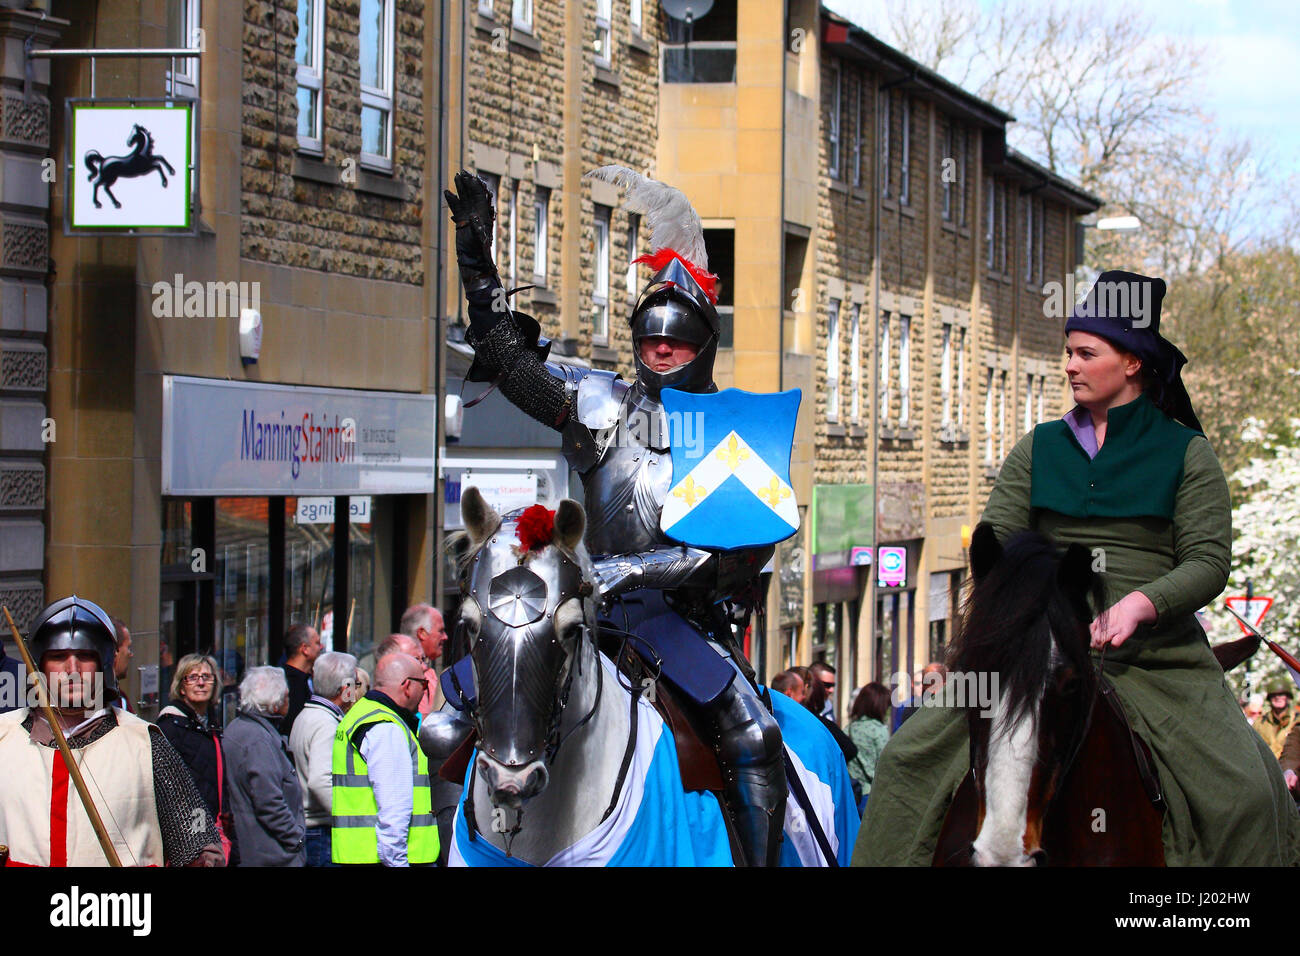 Morley, Leeds, UK. 23rd April, 2017. Morley Leeds started it's St Geroges day celebrations Sunday morning with a parade headed by St George that started at Morley town hall and made it's way through the streets followed by brass bands and reenactment societies.Taken on the 23rd April 2017. Credit: Andrew Gardner/Alamy Live News Stock Photo